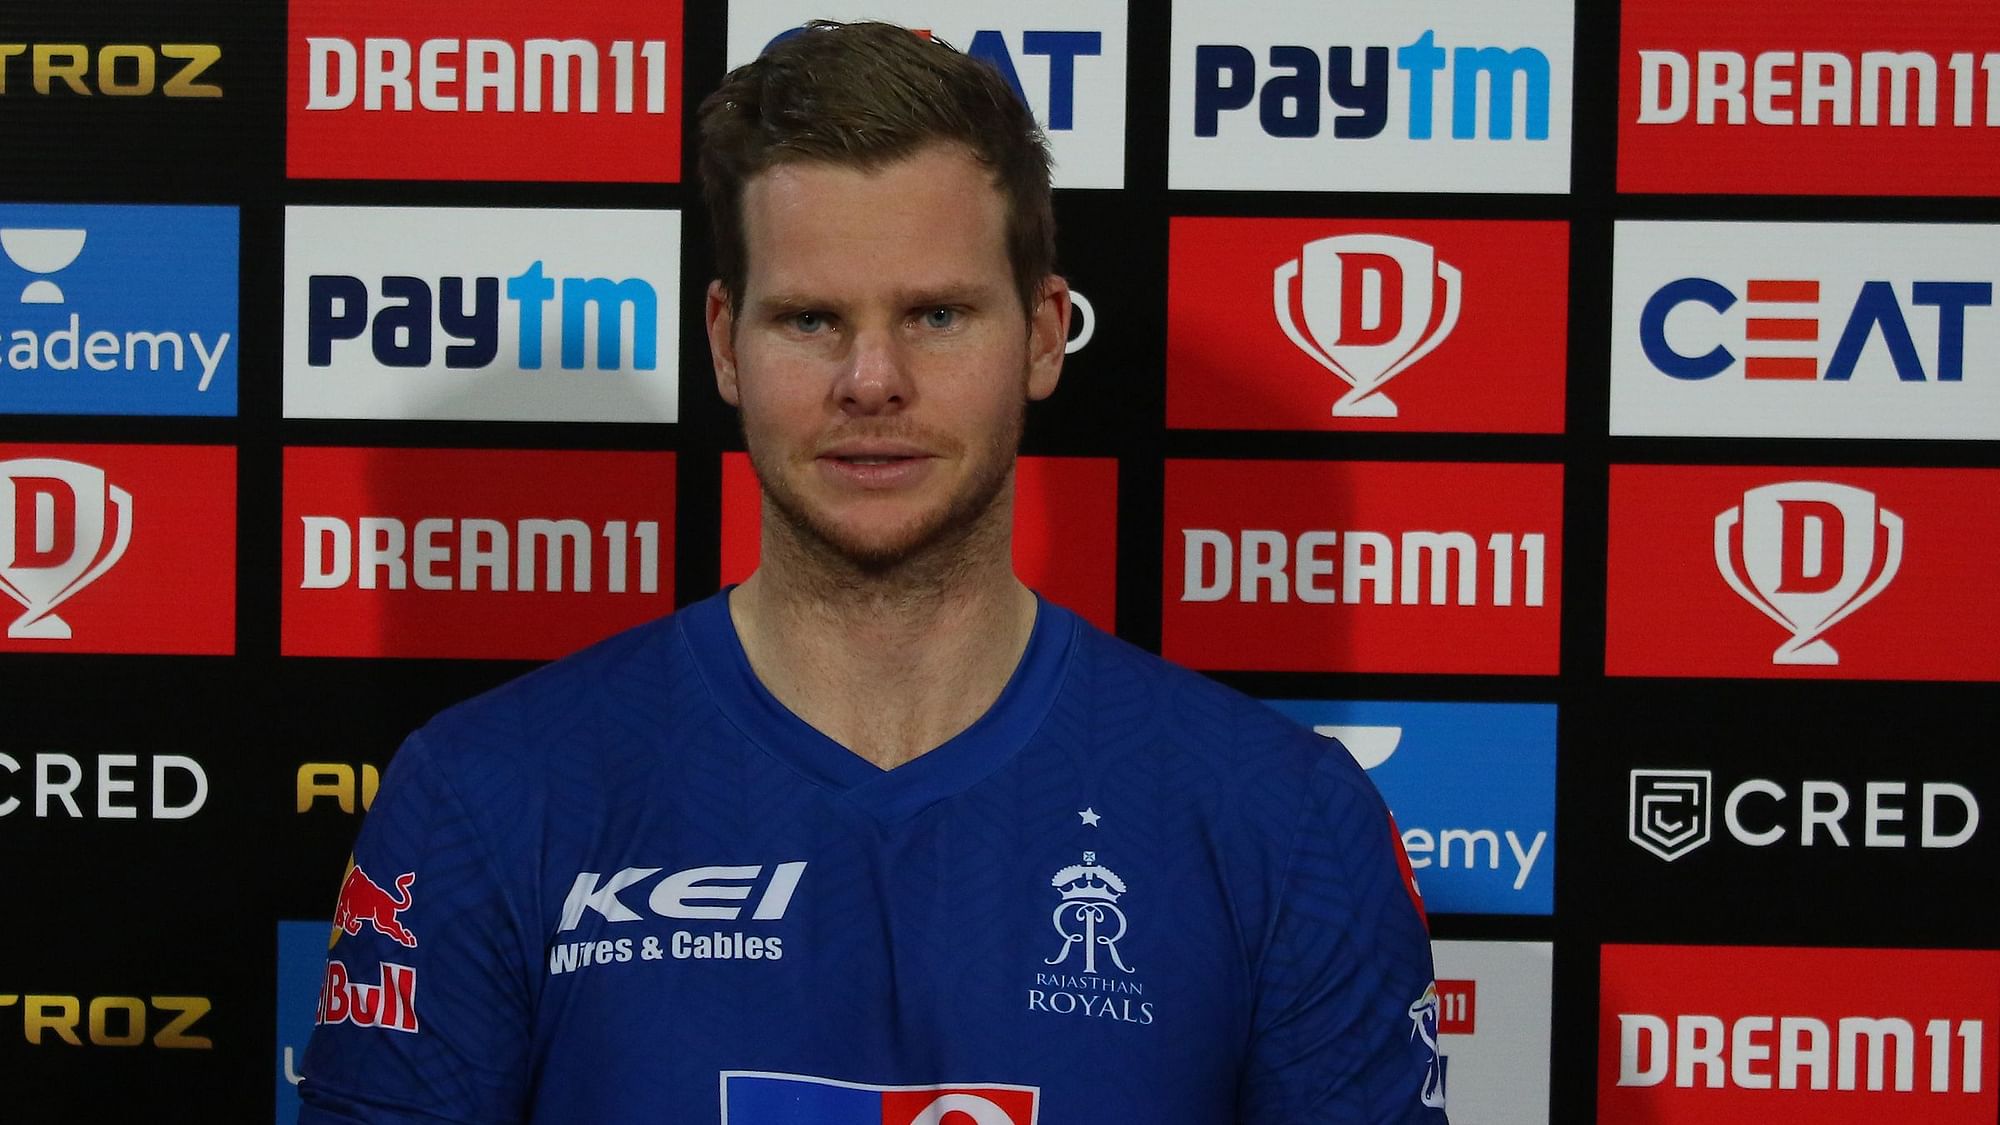 Rajasthan Royals skipper Steve Smith during the post-match press conference